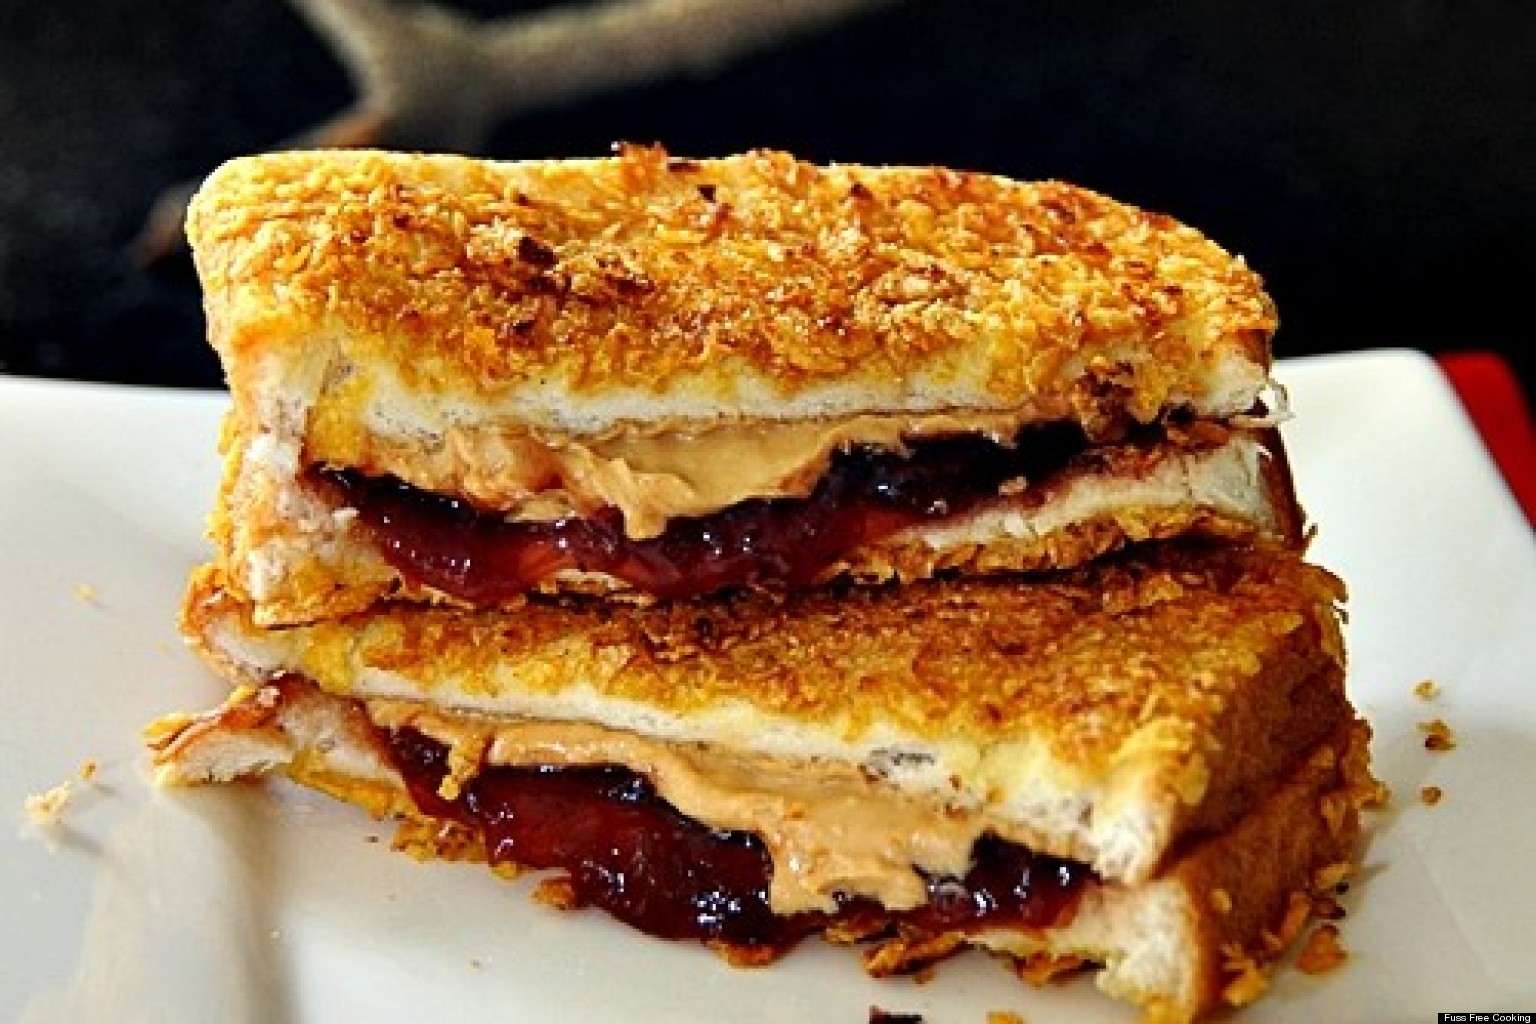 o-GRILLED-PEANUT-BUTTER-AND-JELLY-facebook.jpg